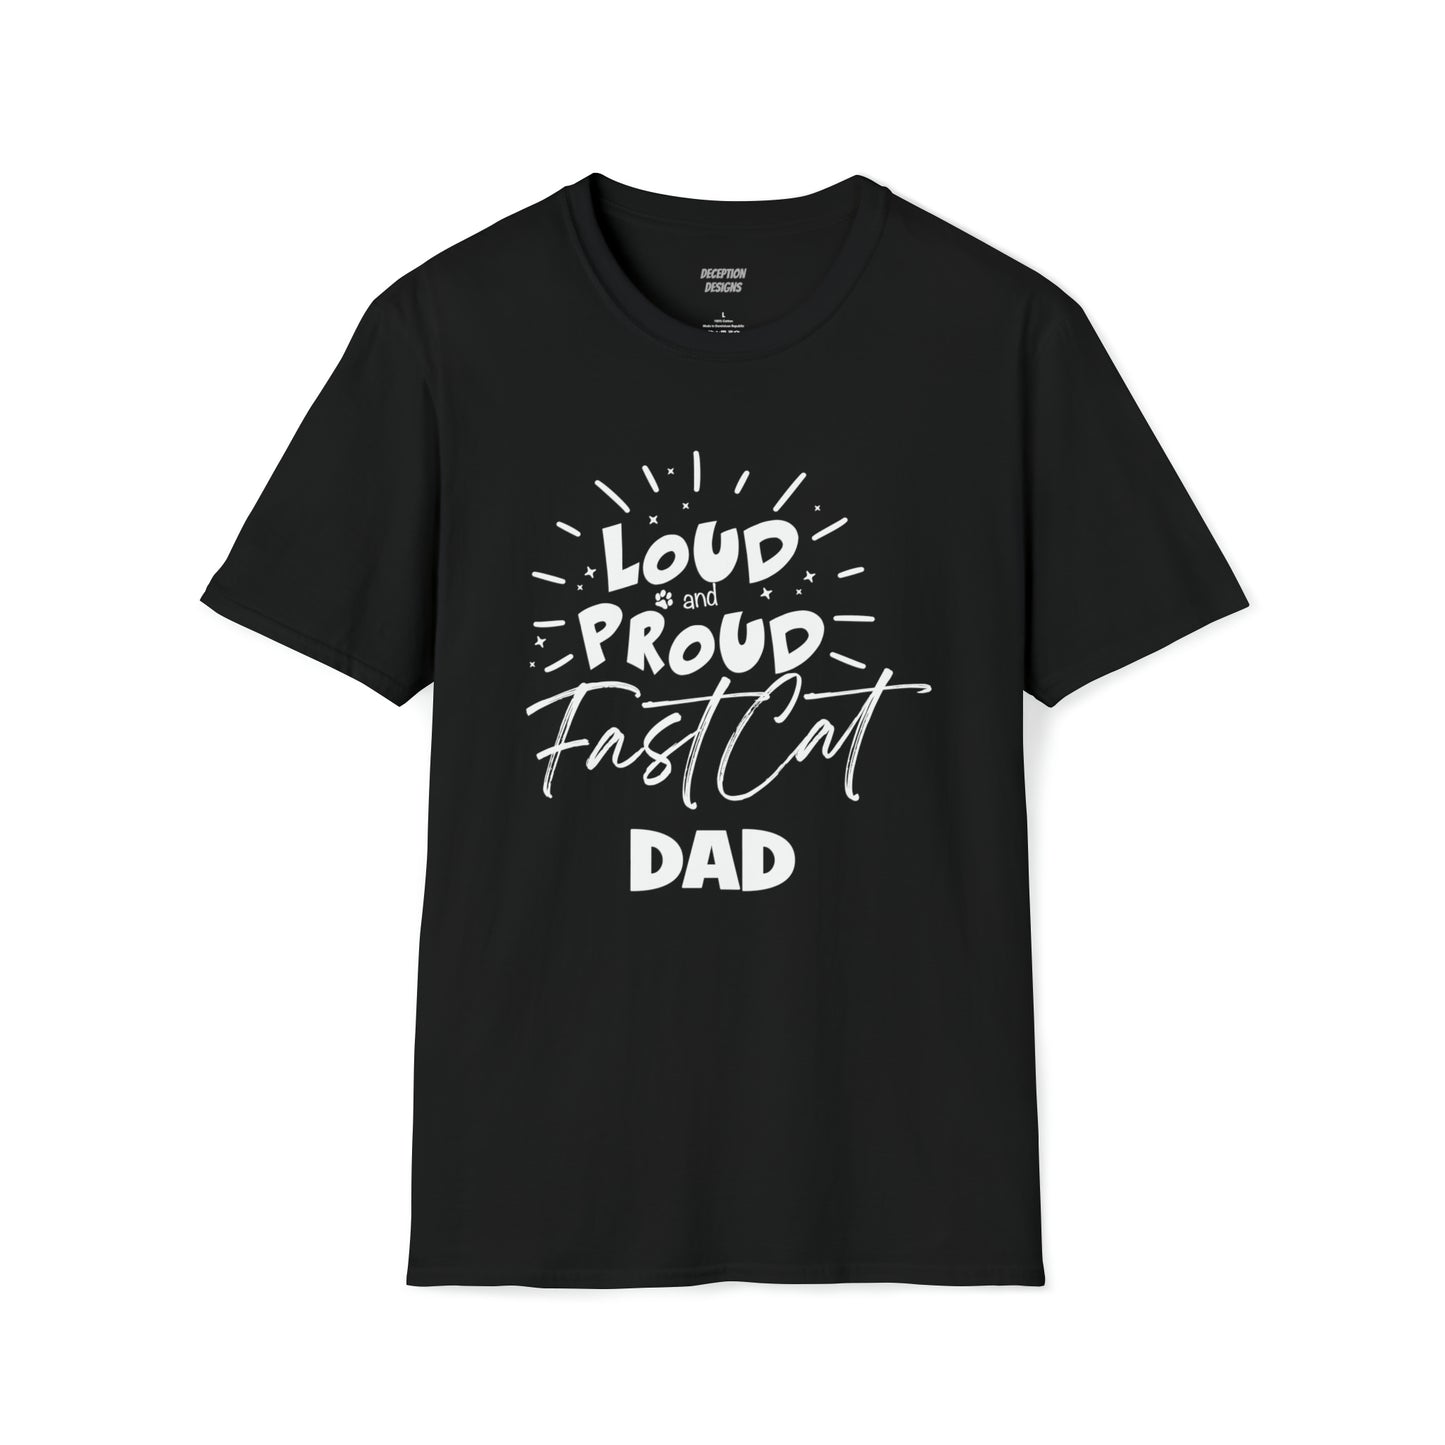 2 LOUD PROUD FAST CAT DAD -  Unisex Softstyle T-Shirt